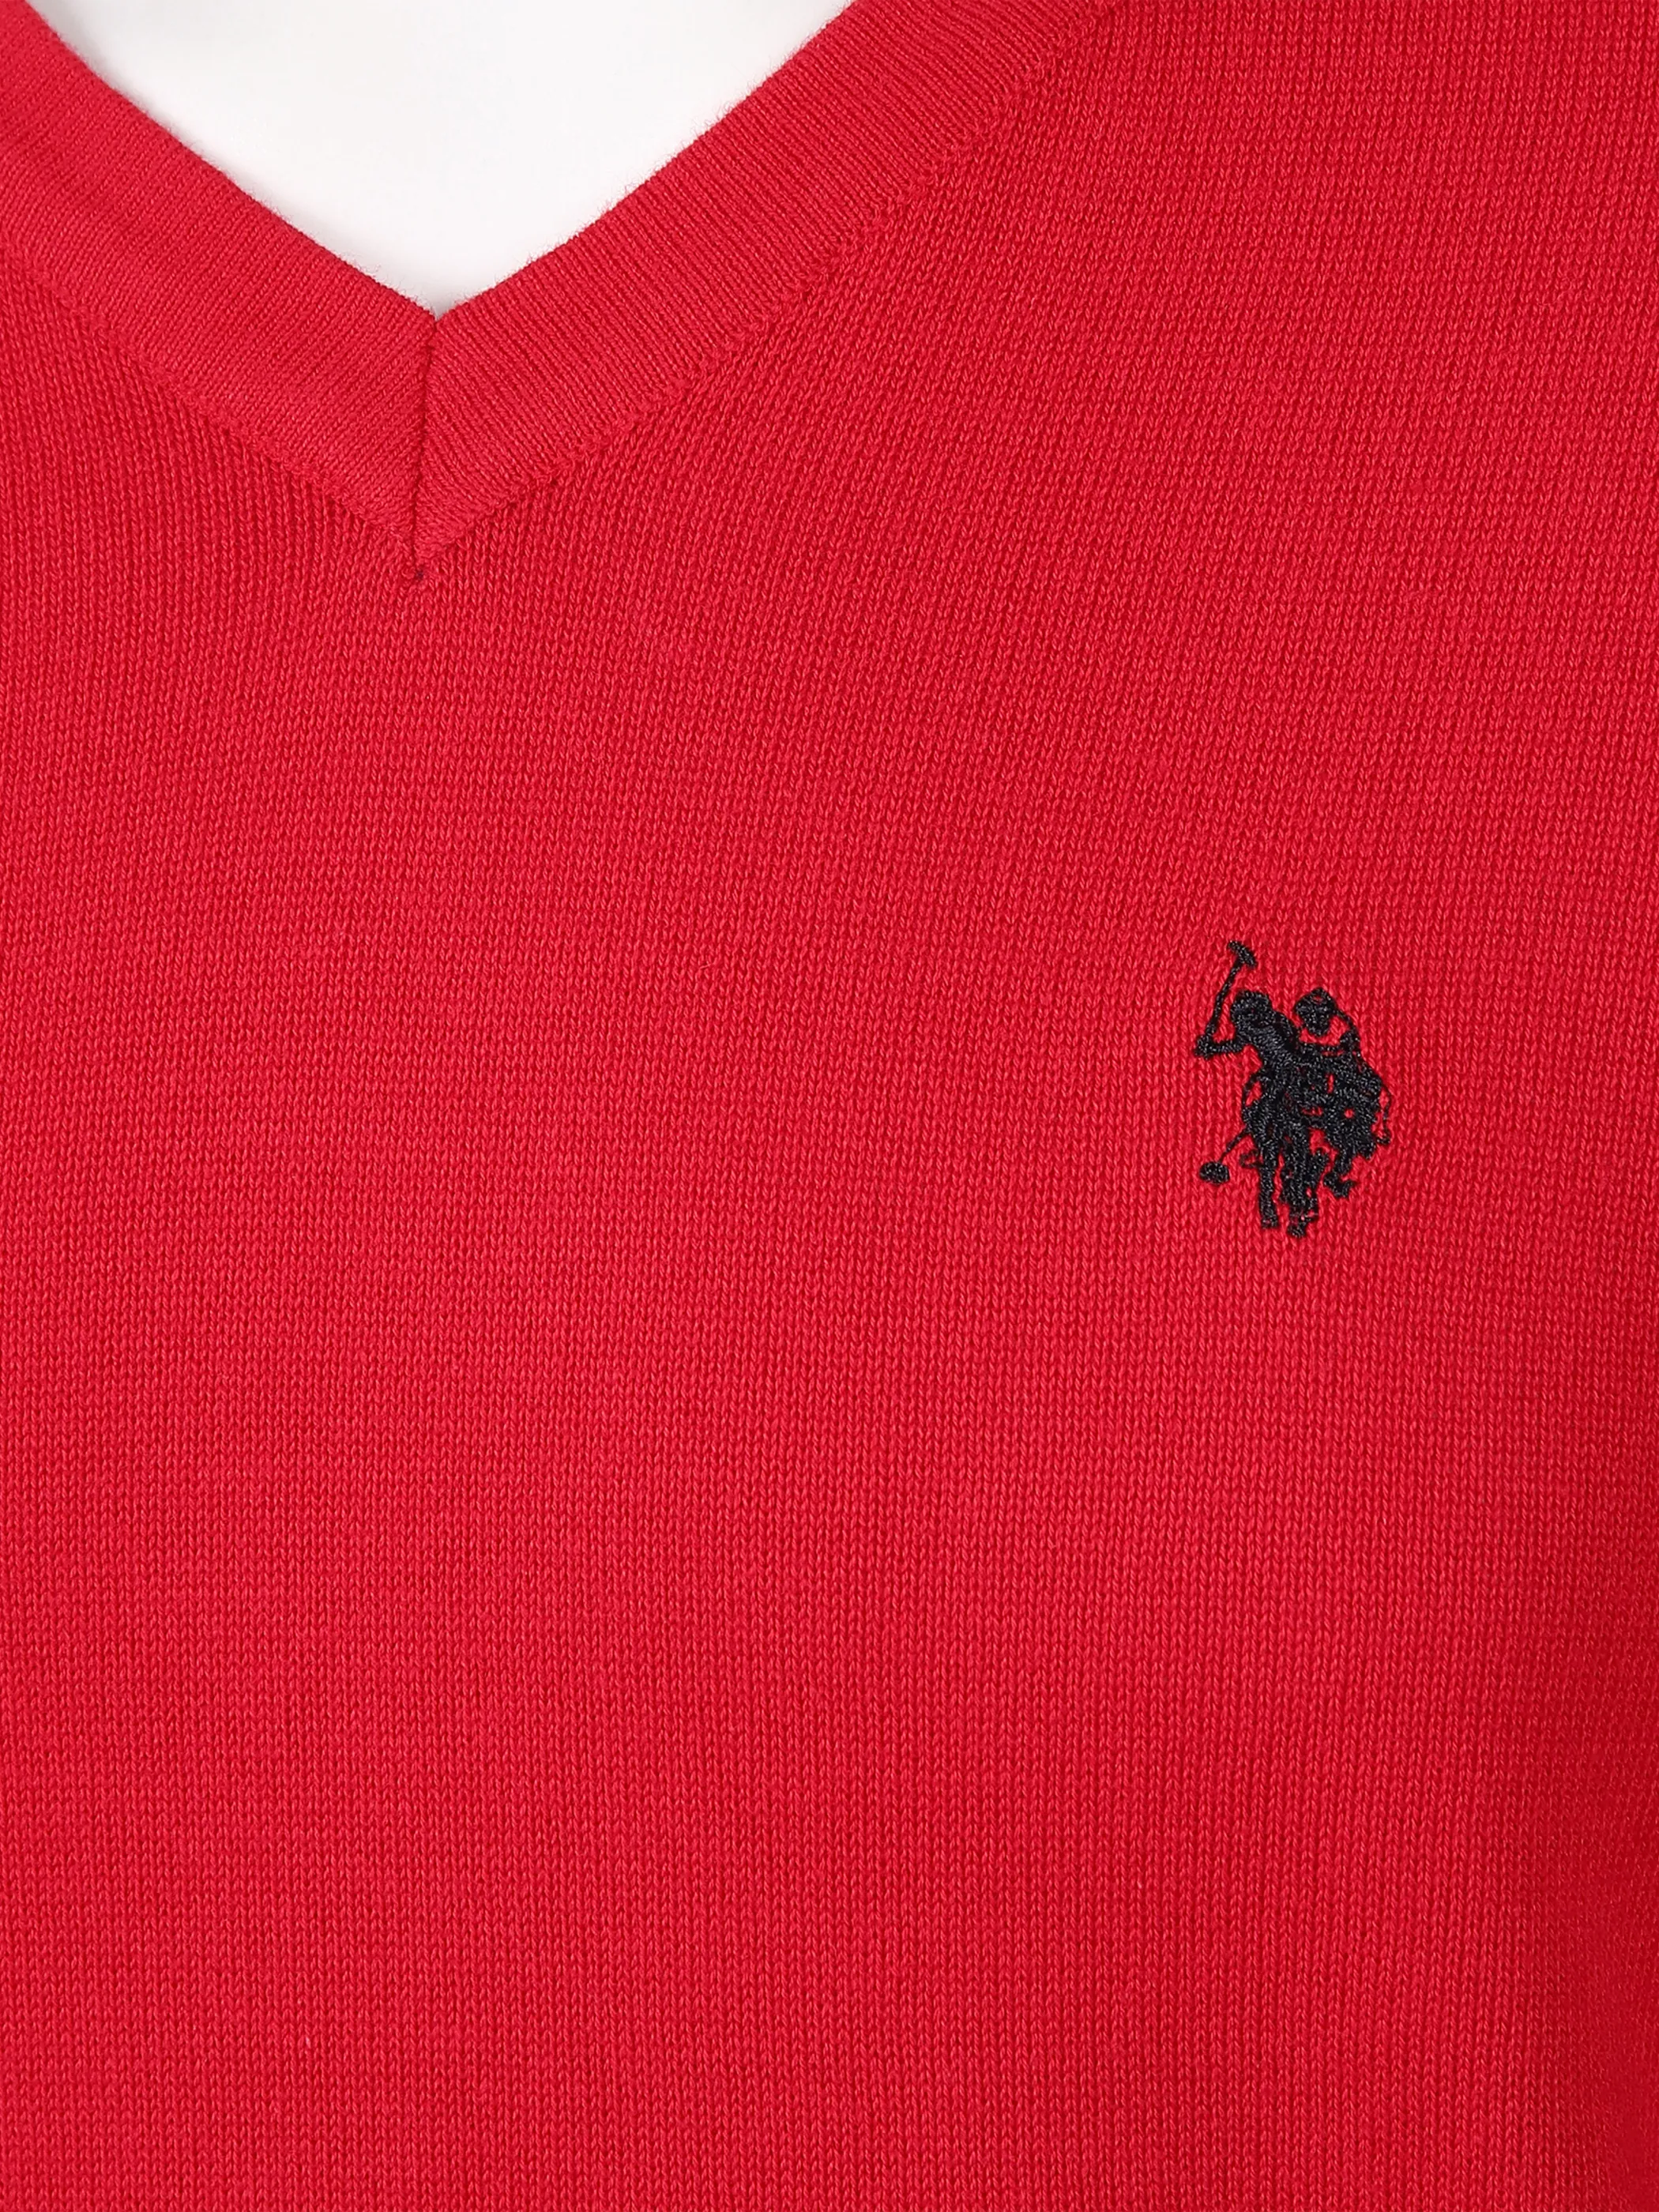 U.S. Polo Assn. He. Pullover U.S. Polo V-Neck Rot 799159 RED 3